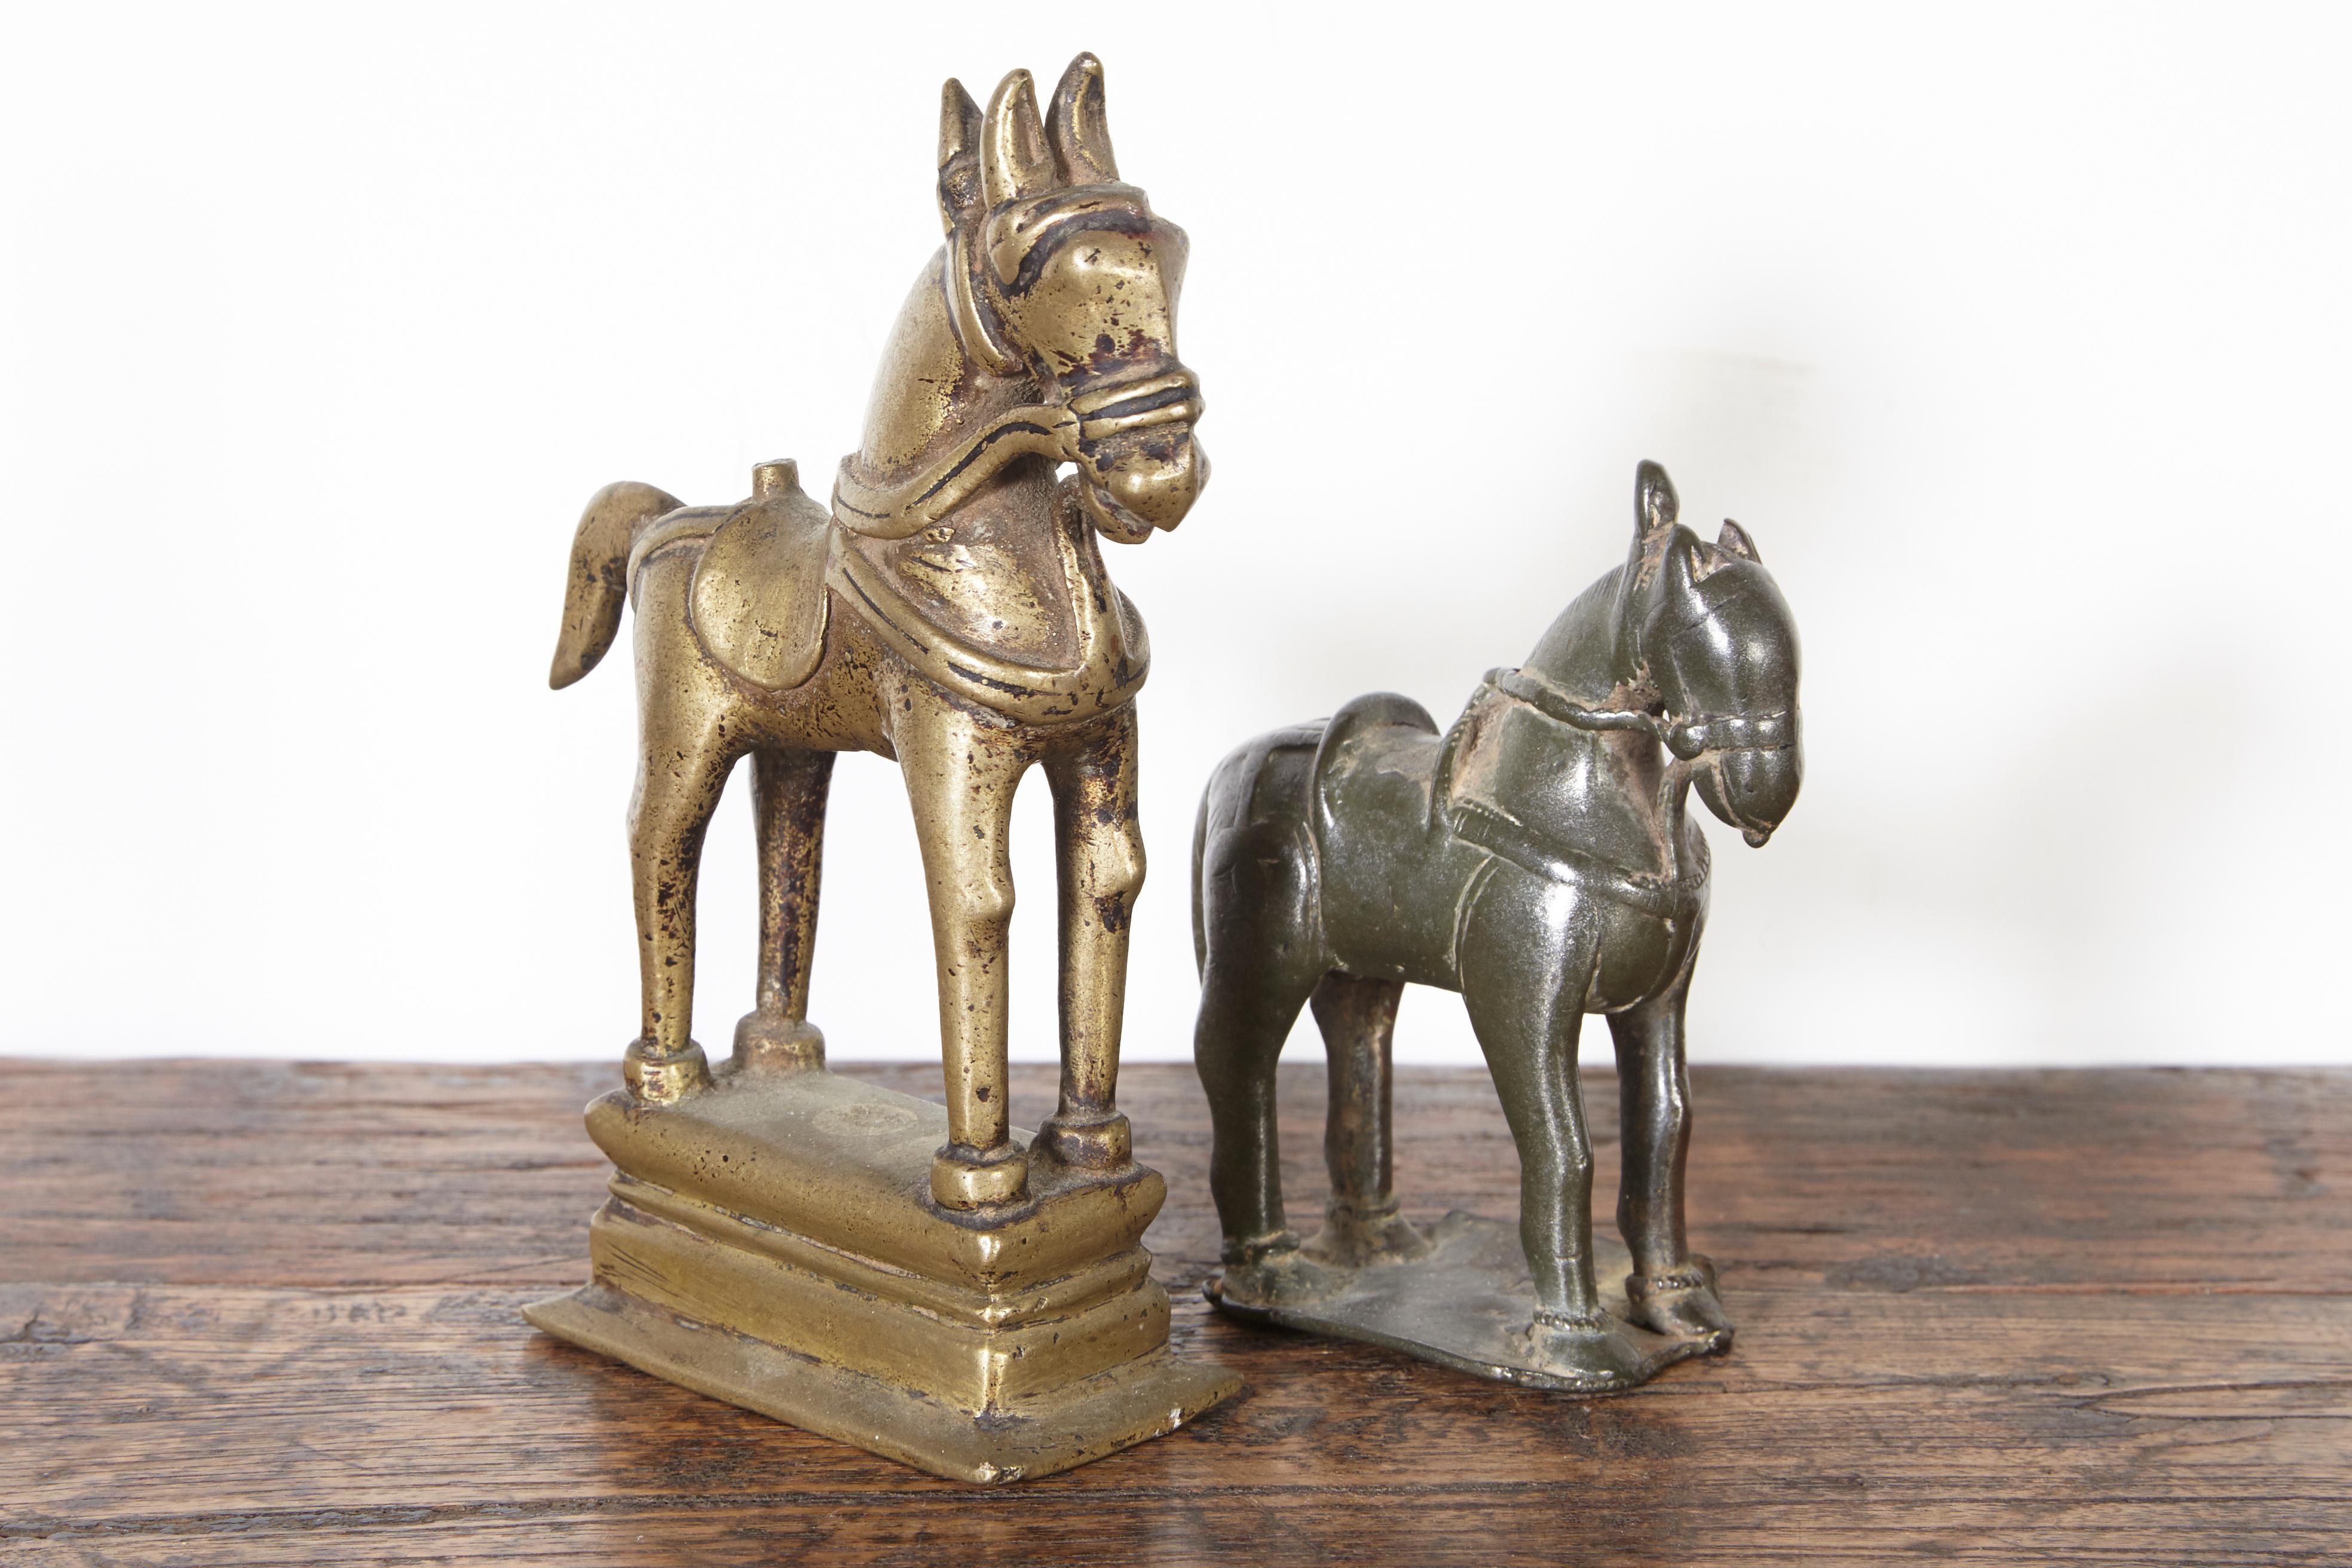 Two nicely cast and beautifully designed votive horses from India, with great patina and presence. These pieces combine spiritually and beauty. 
Priced and sold individually.
Dimensions:
Large: L:3.5 D:2 H:5.5
Small: L:3 D:1.25 H:3.5.
 